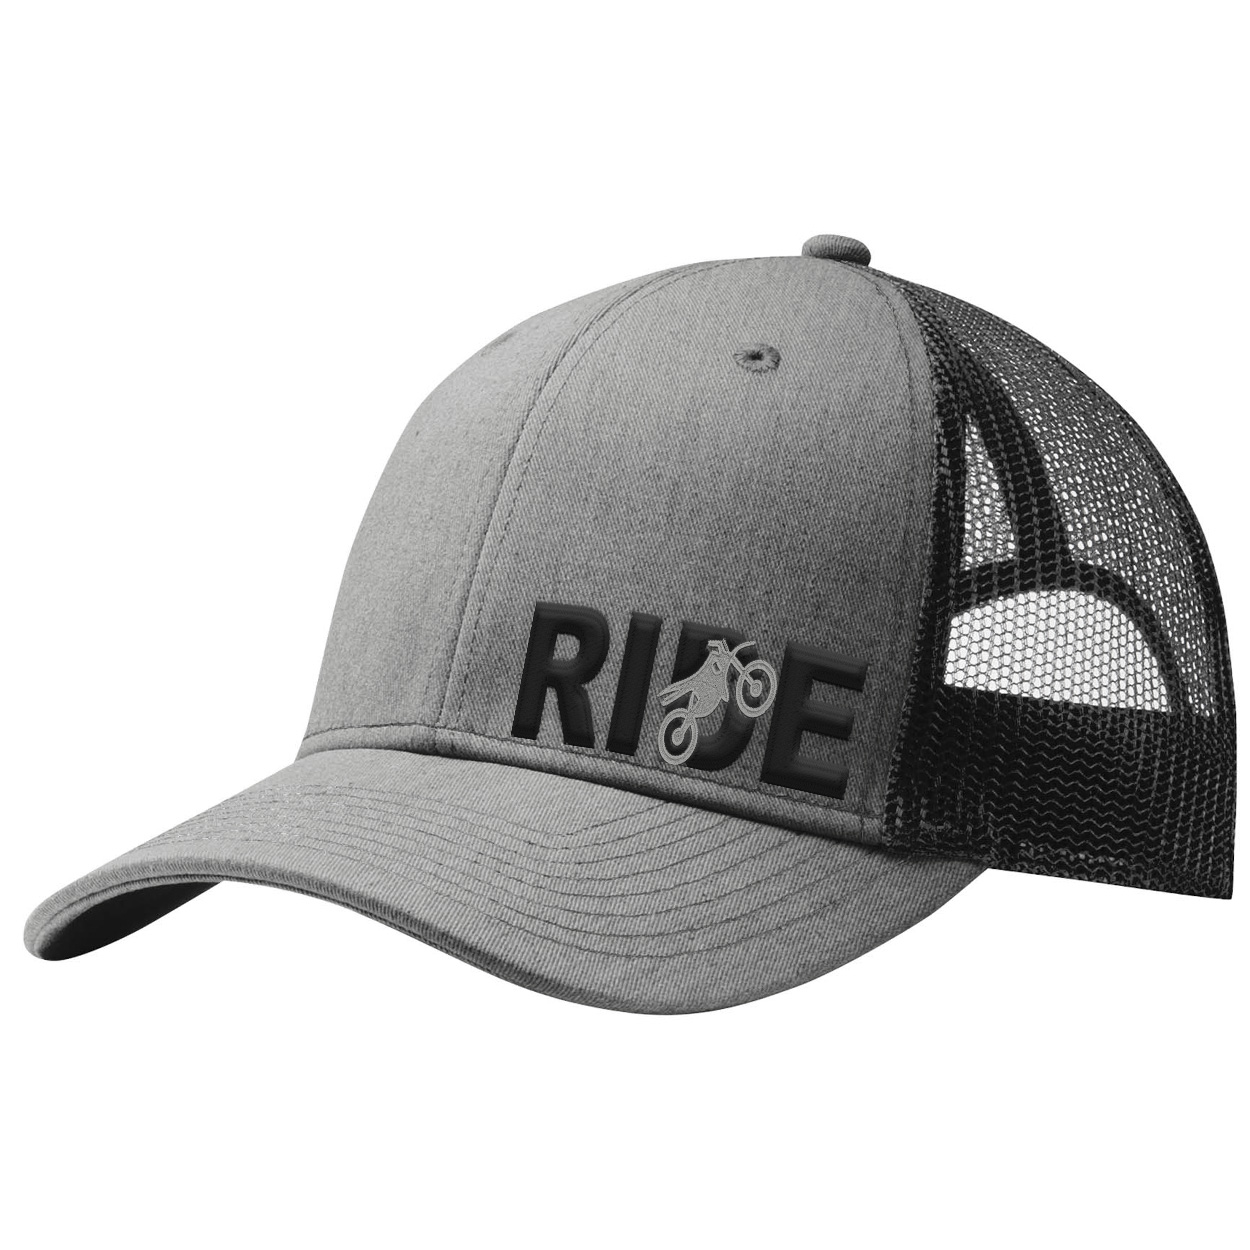 Ride Moto Logo Night Out Pro Embroidered Snapback Trucker Hat Heather Gray/Black